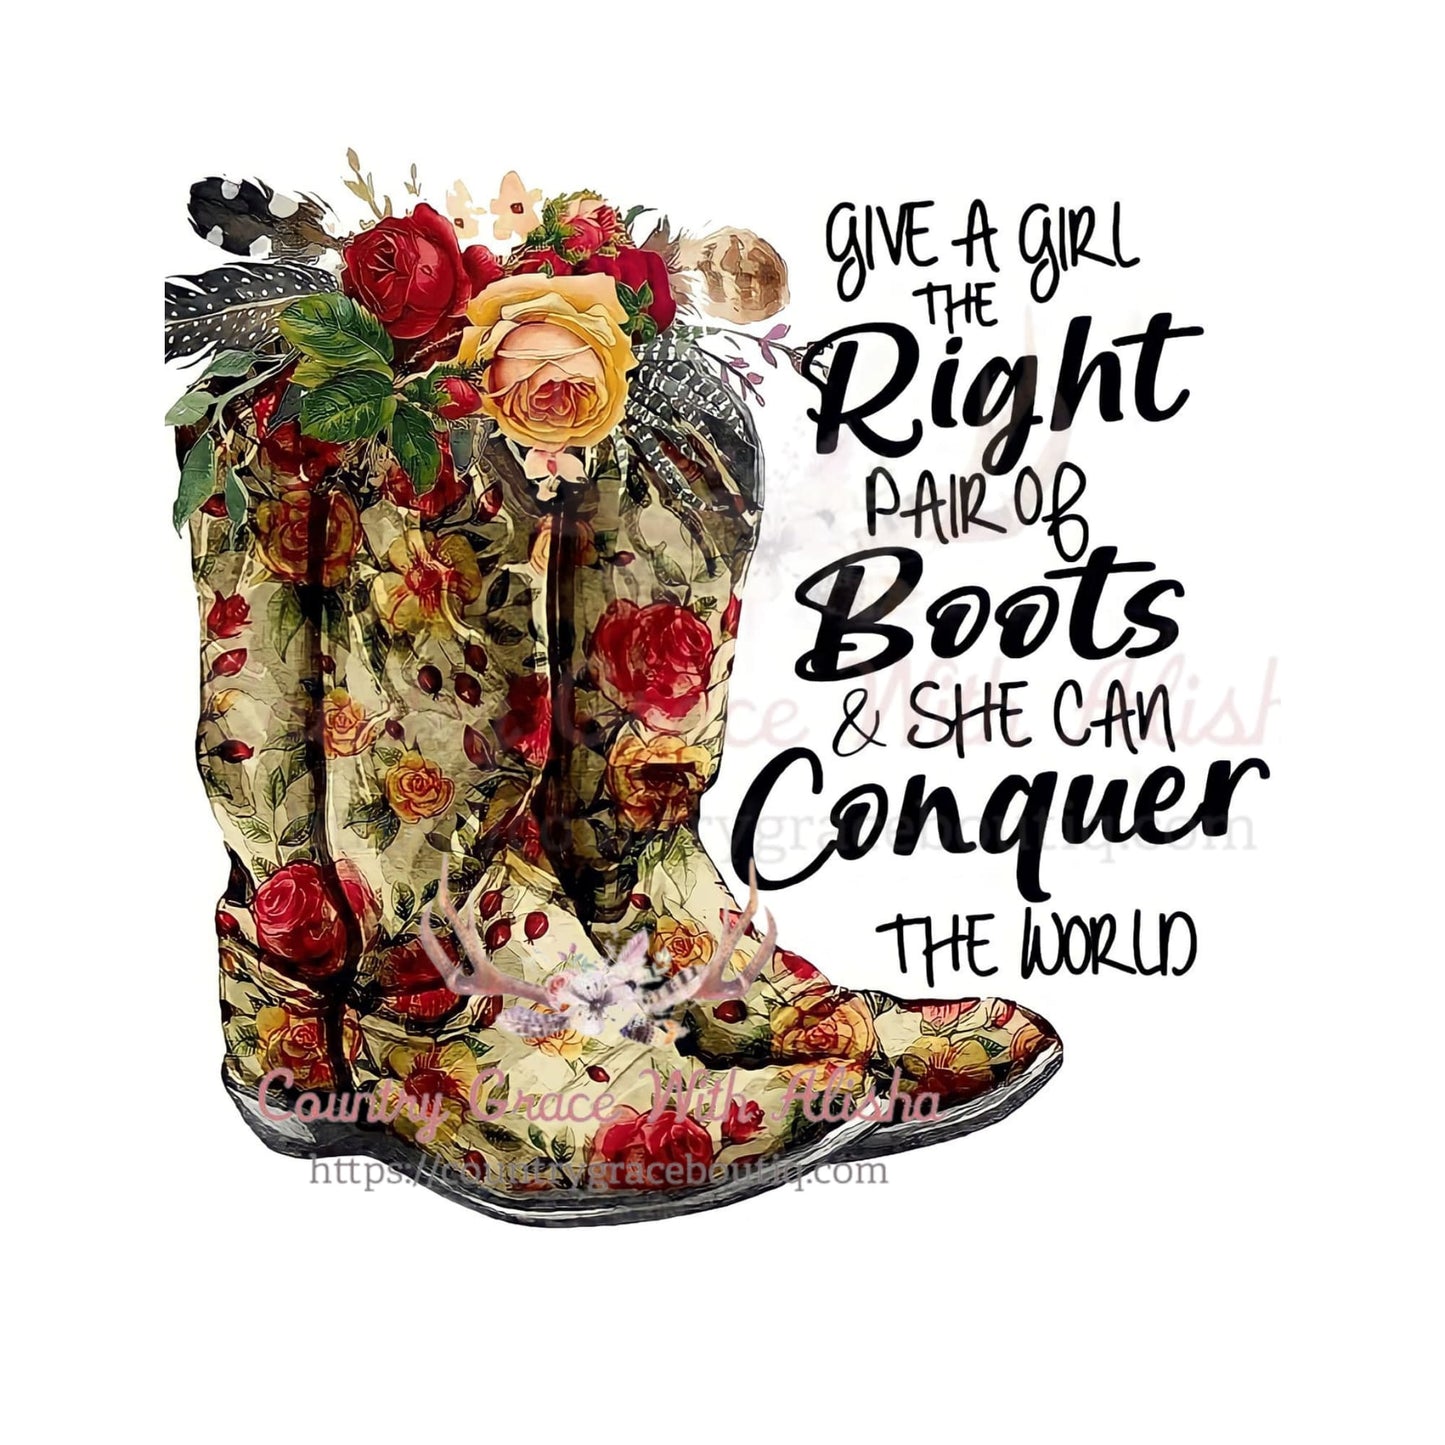 Boots Conquer The World Sublimation Transfer - Sub $1.50 